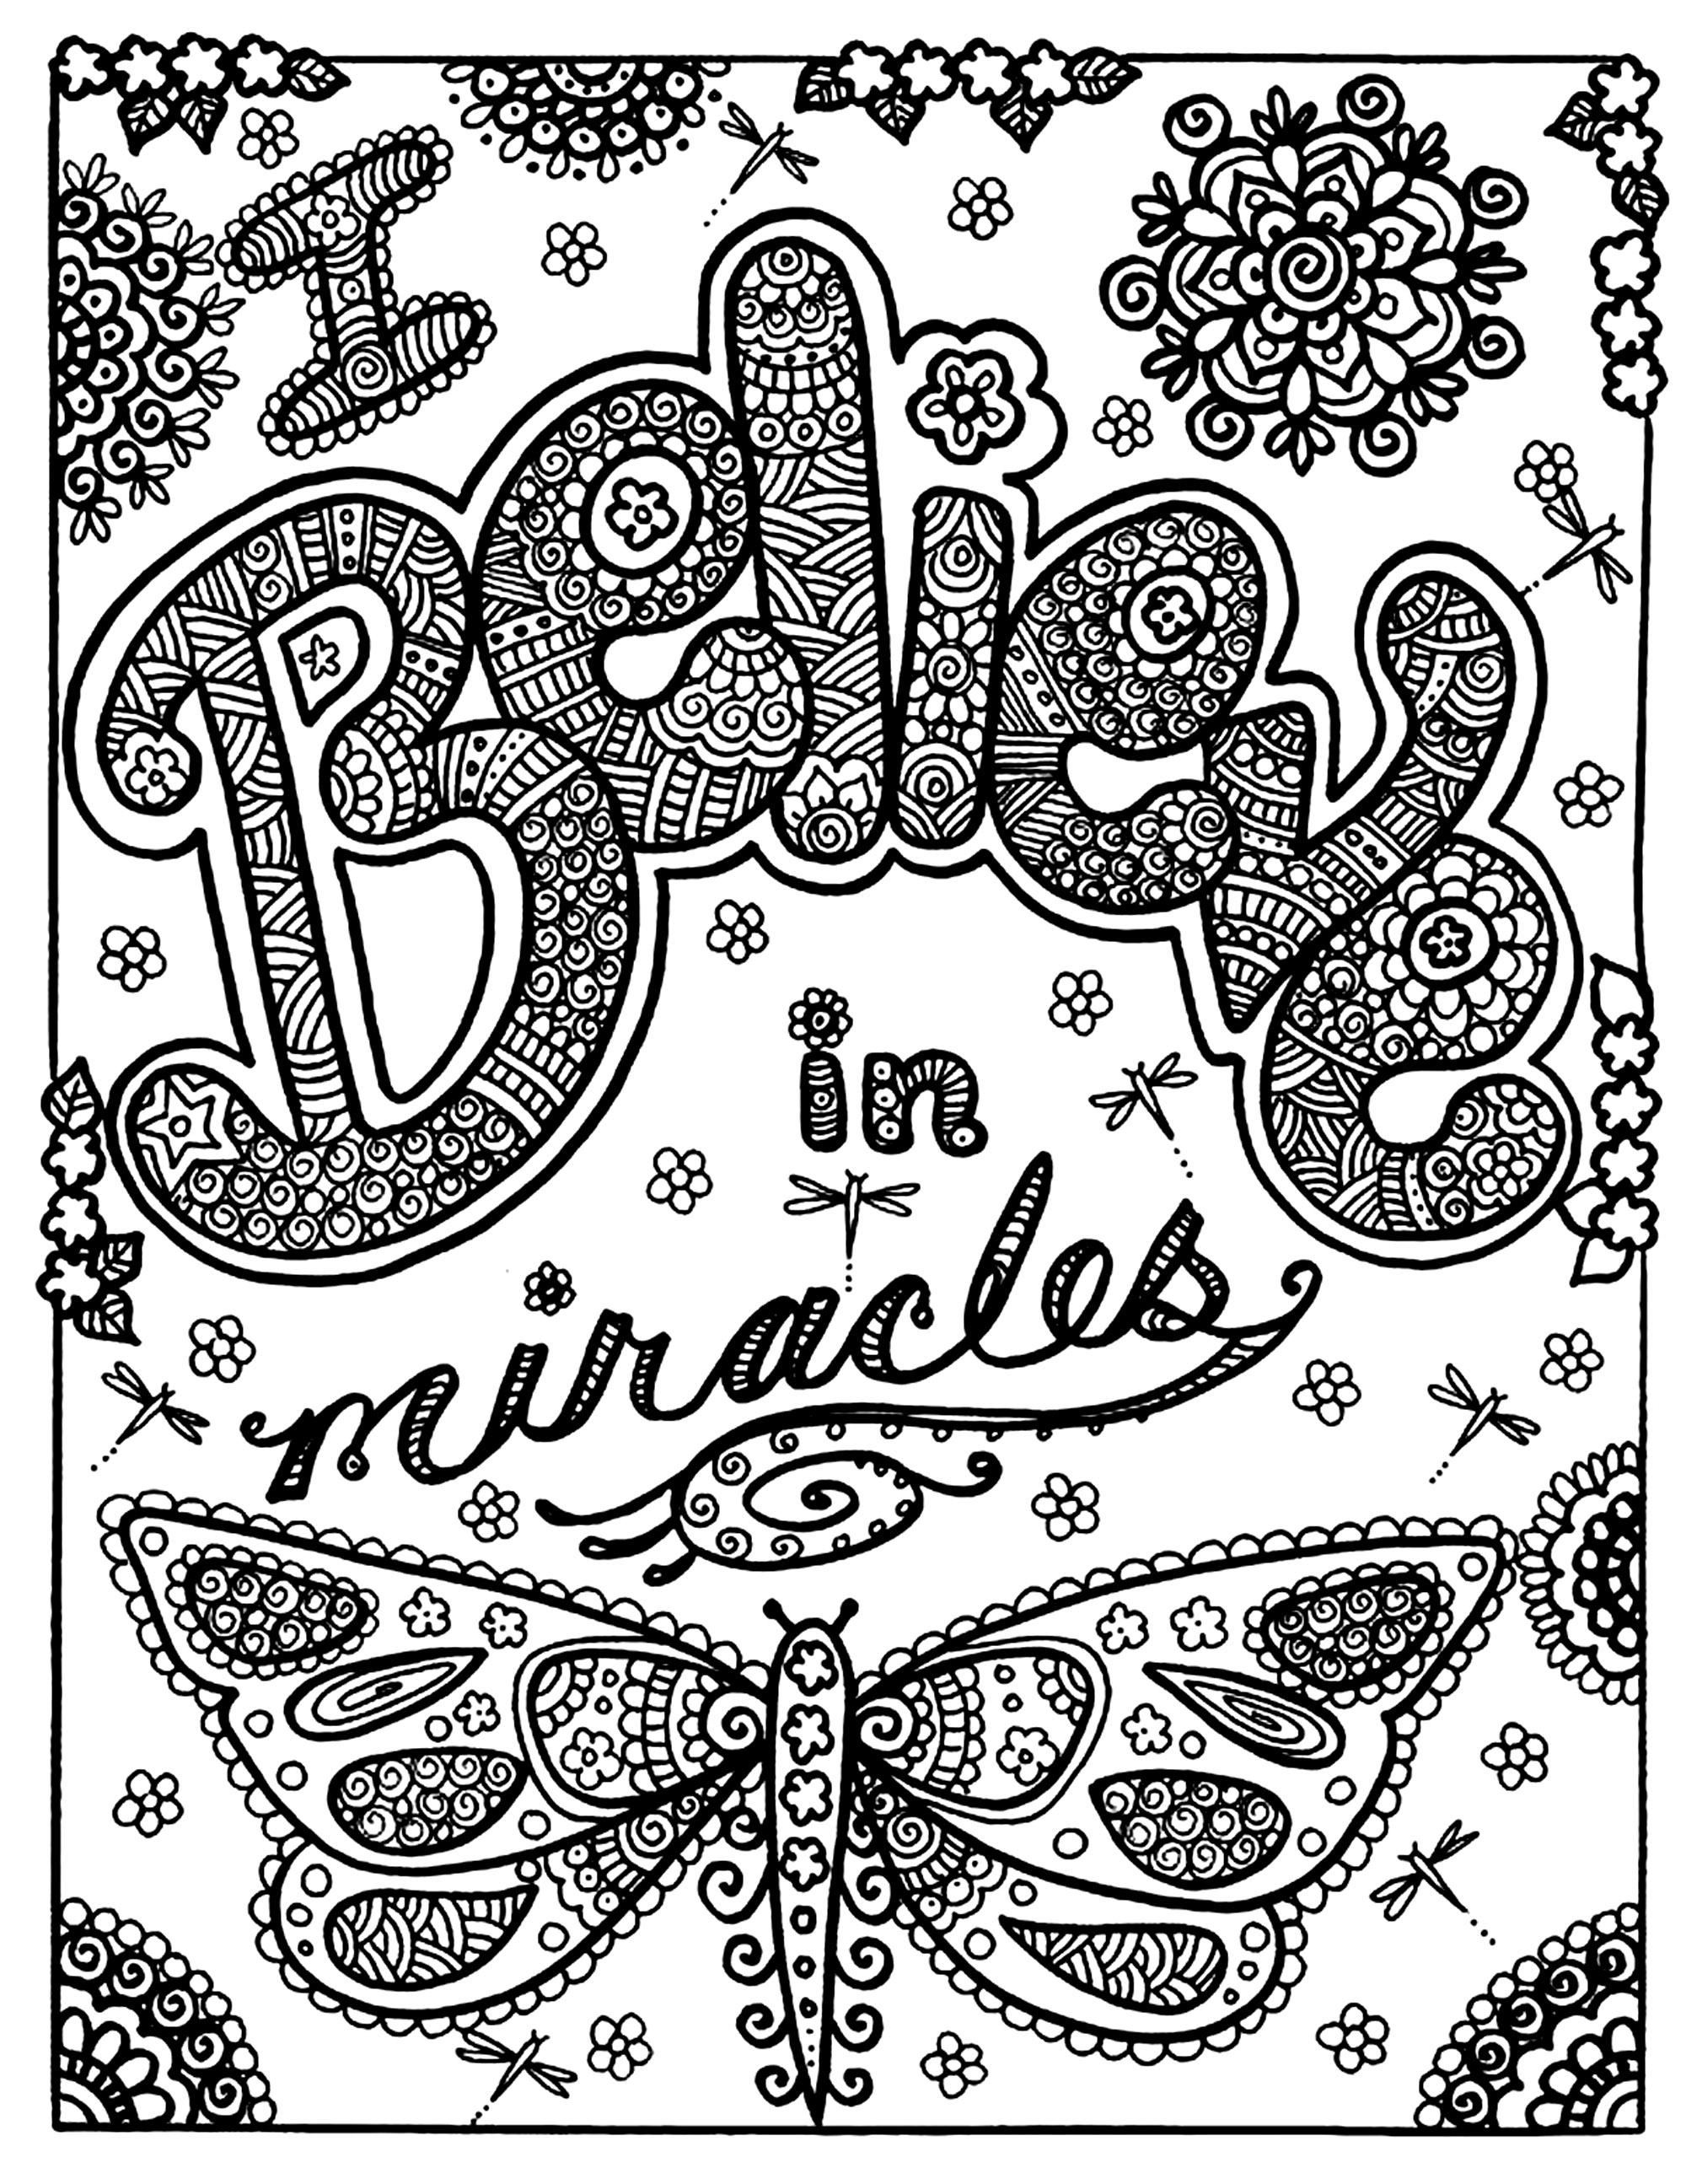 Magnificient drawing with the text 'I believe in miracles', and a beautiful butterfly ...